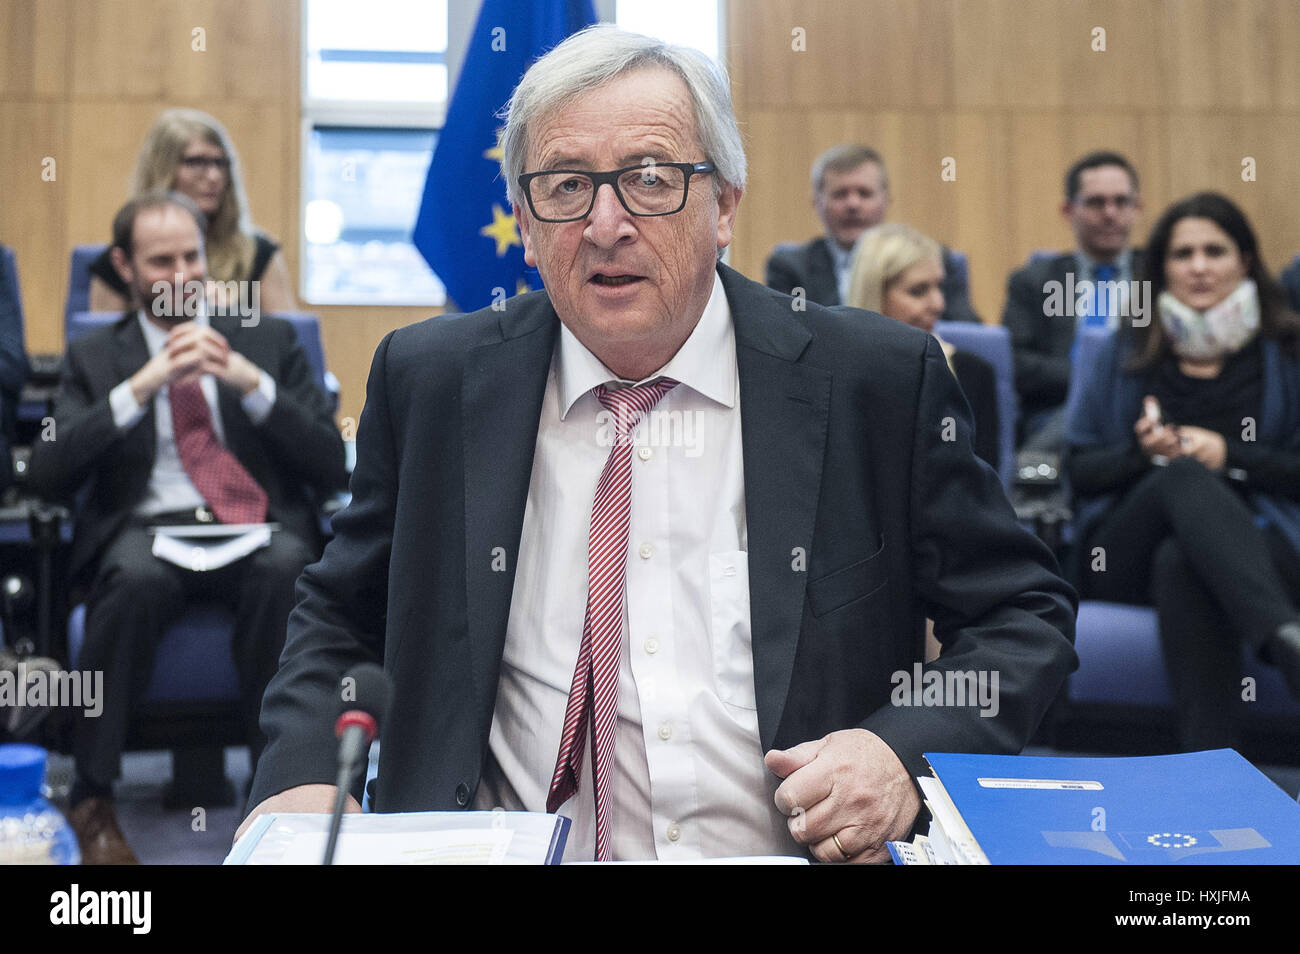 Jean-Claude Juncker, the president of the European Commission at the start of European Commission college meeting in Brussels, Belgium on 29.03.2017 UK will trigger article 50 of the Lisbon Treaty today. Which will begin official exit of Great Britain from European Union by Wiktor Dabkowski | usage worldwide Stock Photo